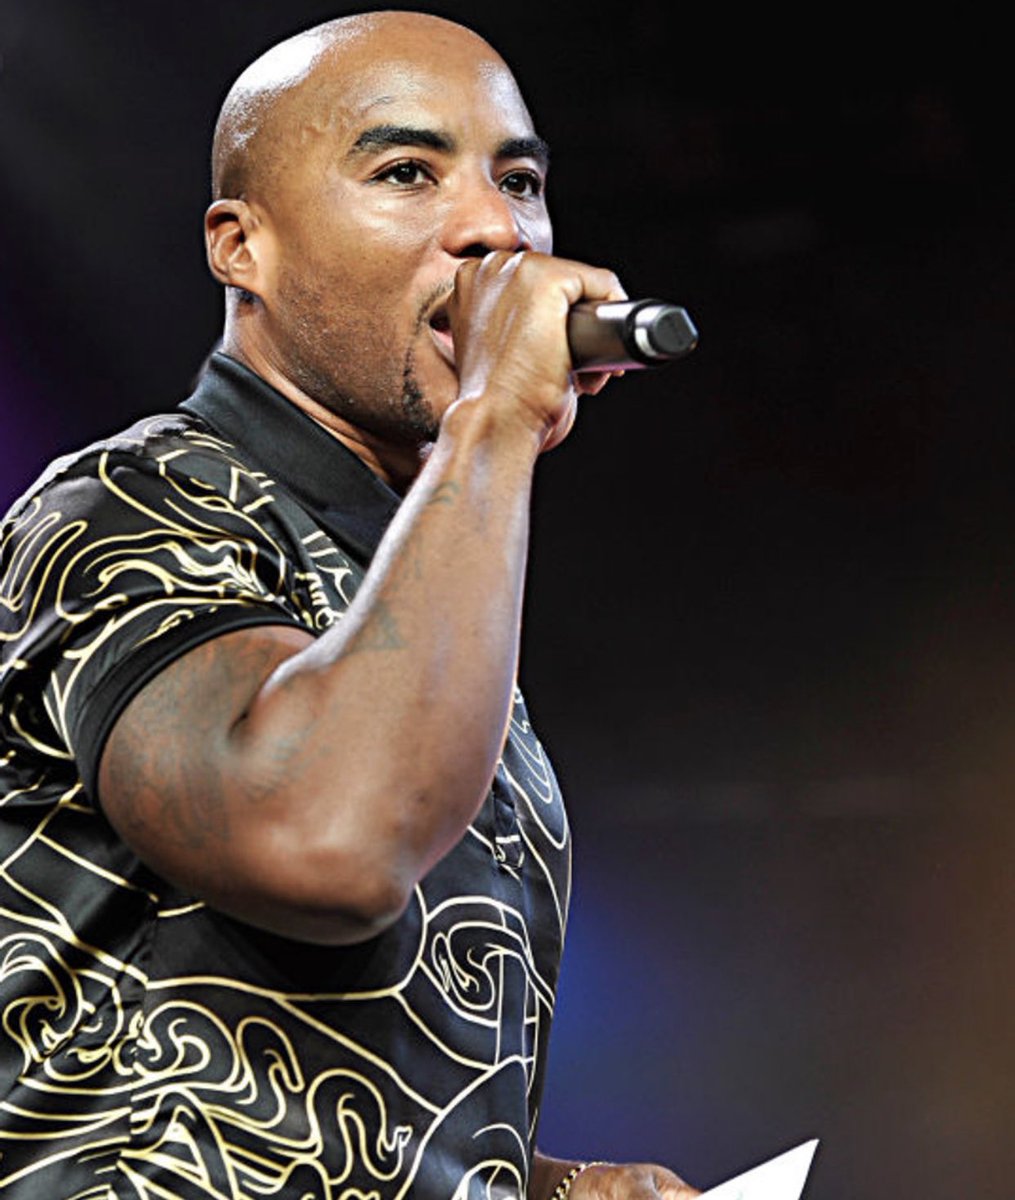 Now Charlamagne is definitely a Congolese man. Why didn’t I see this before?????